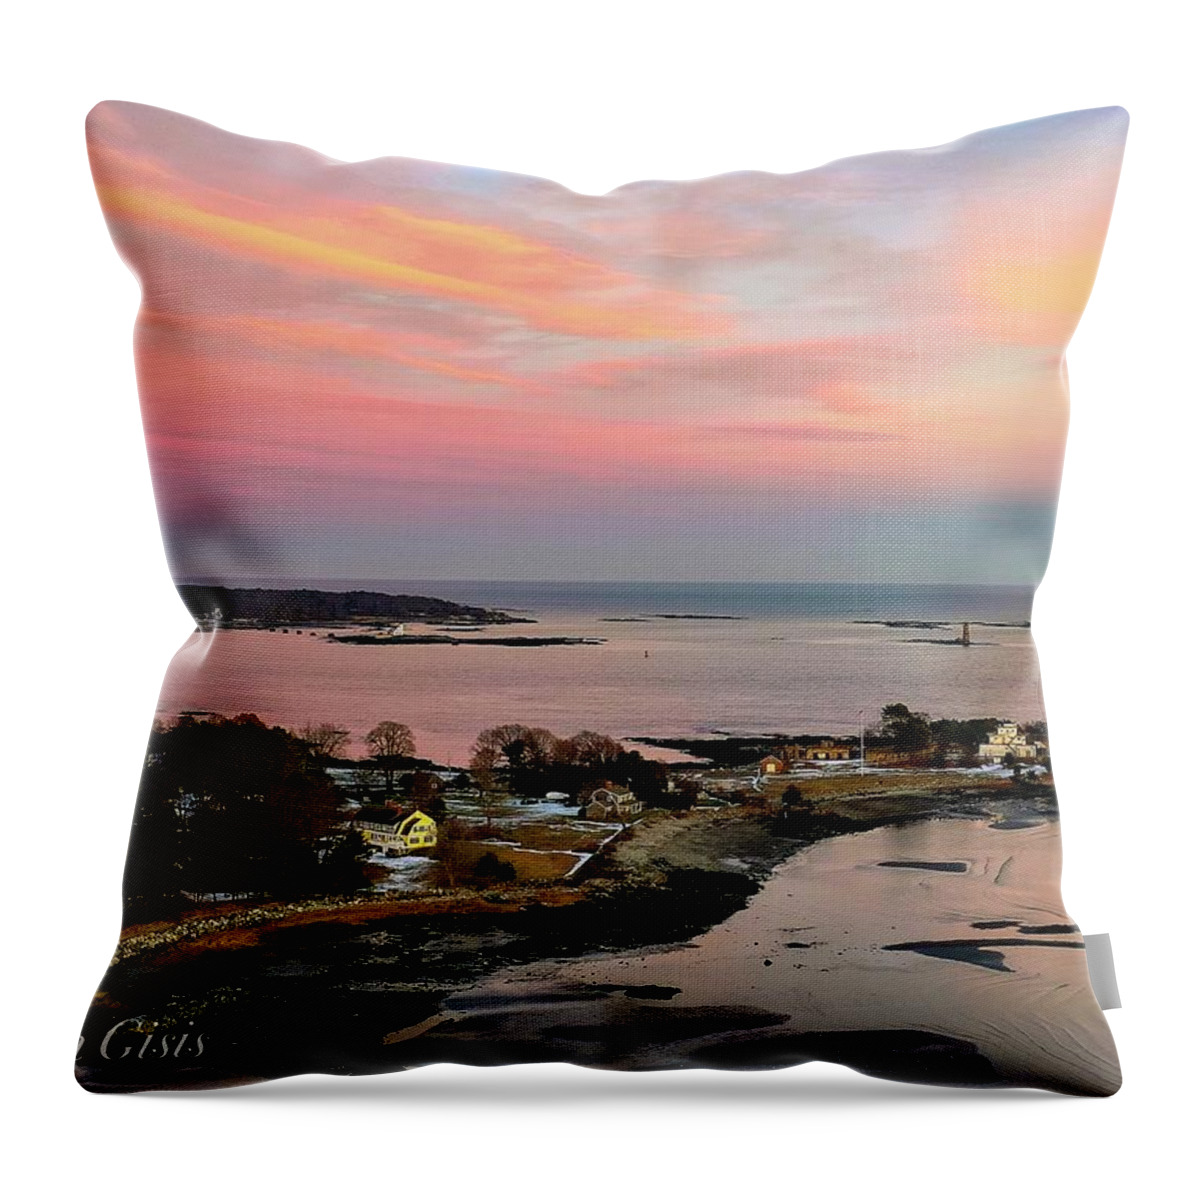  Throw Pillow featuring the photograph New Castle by John Gisis